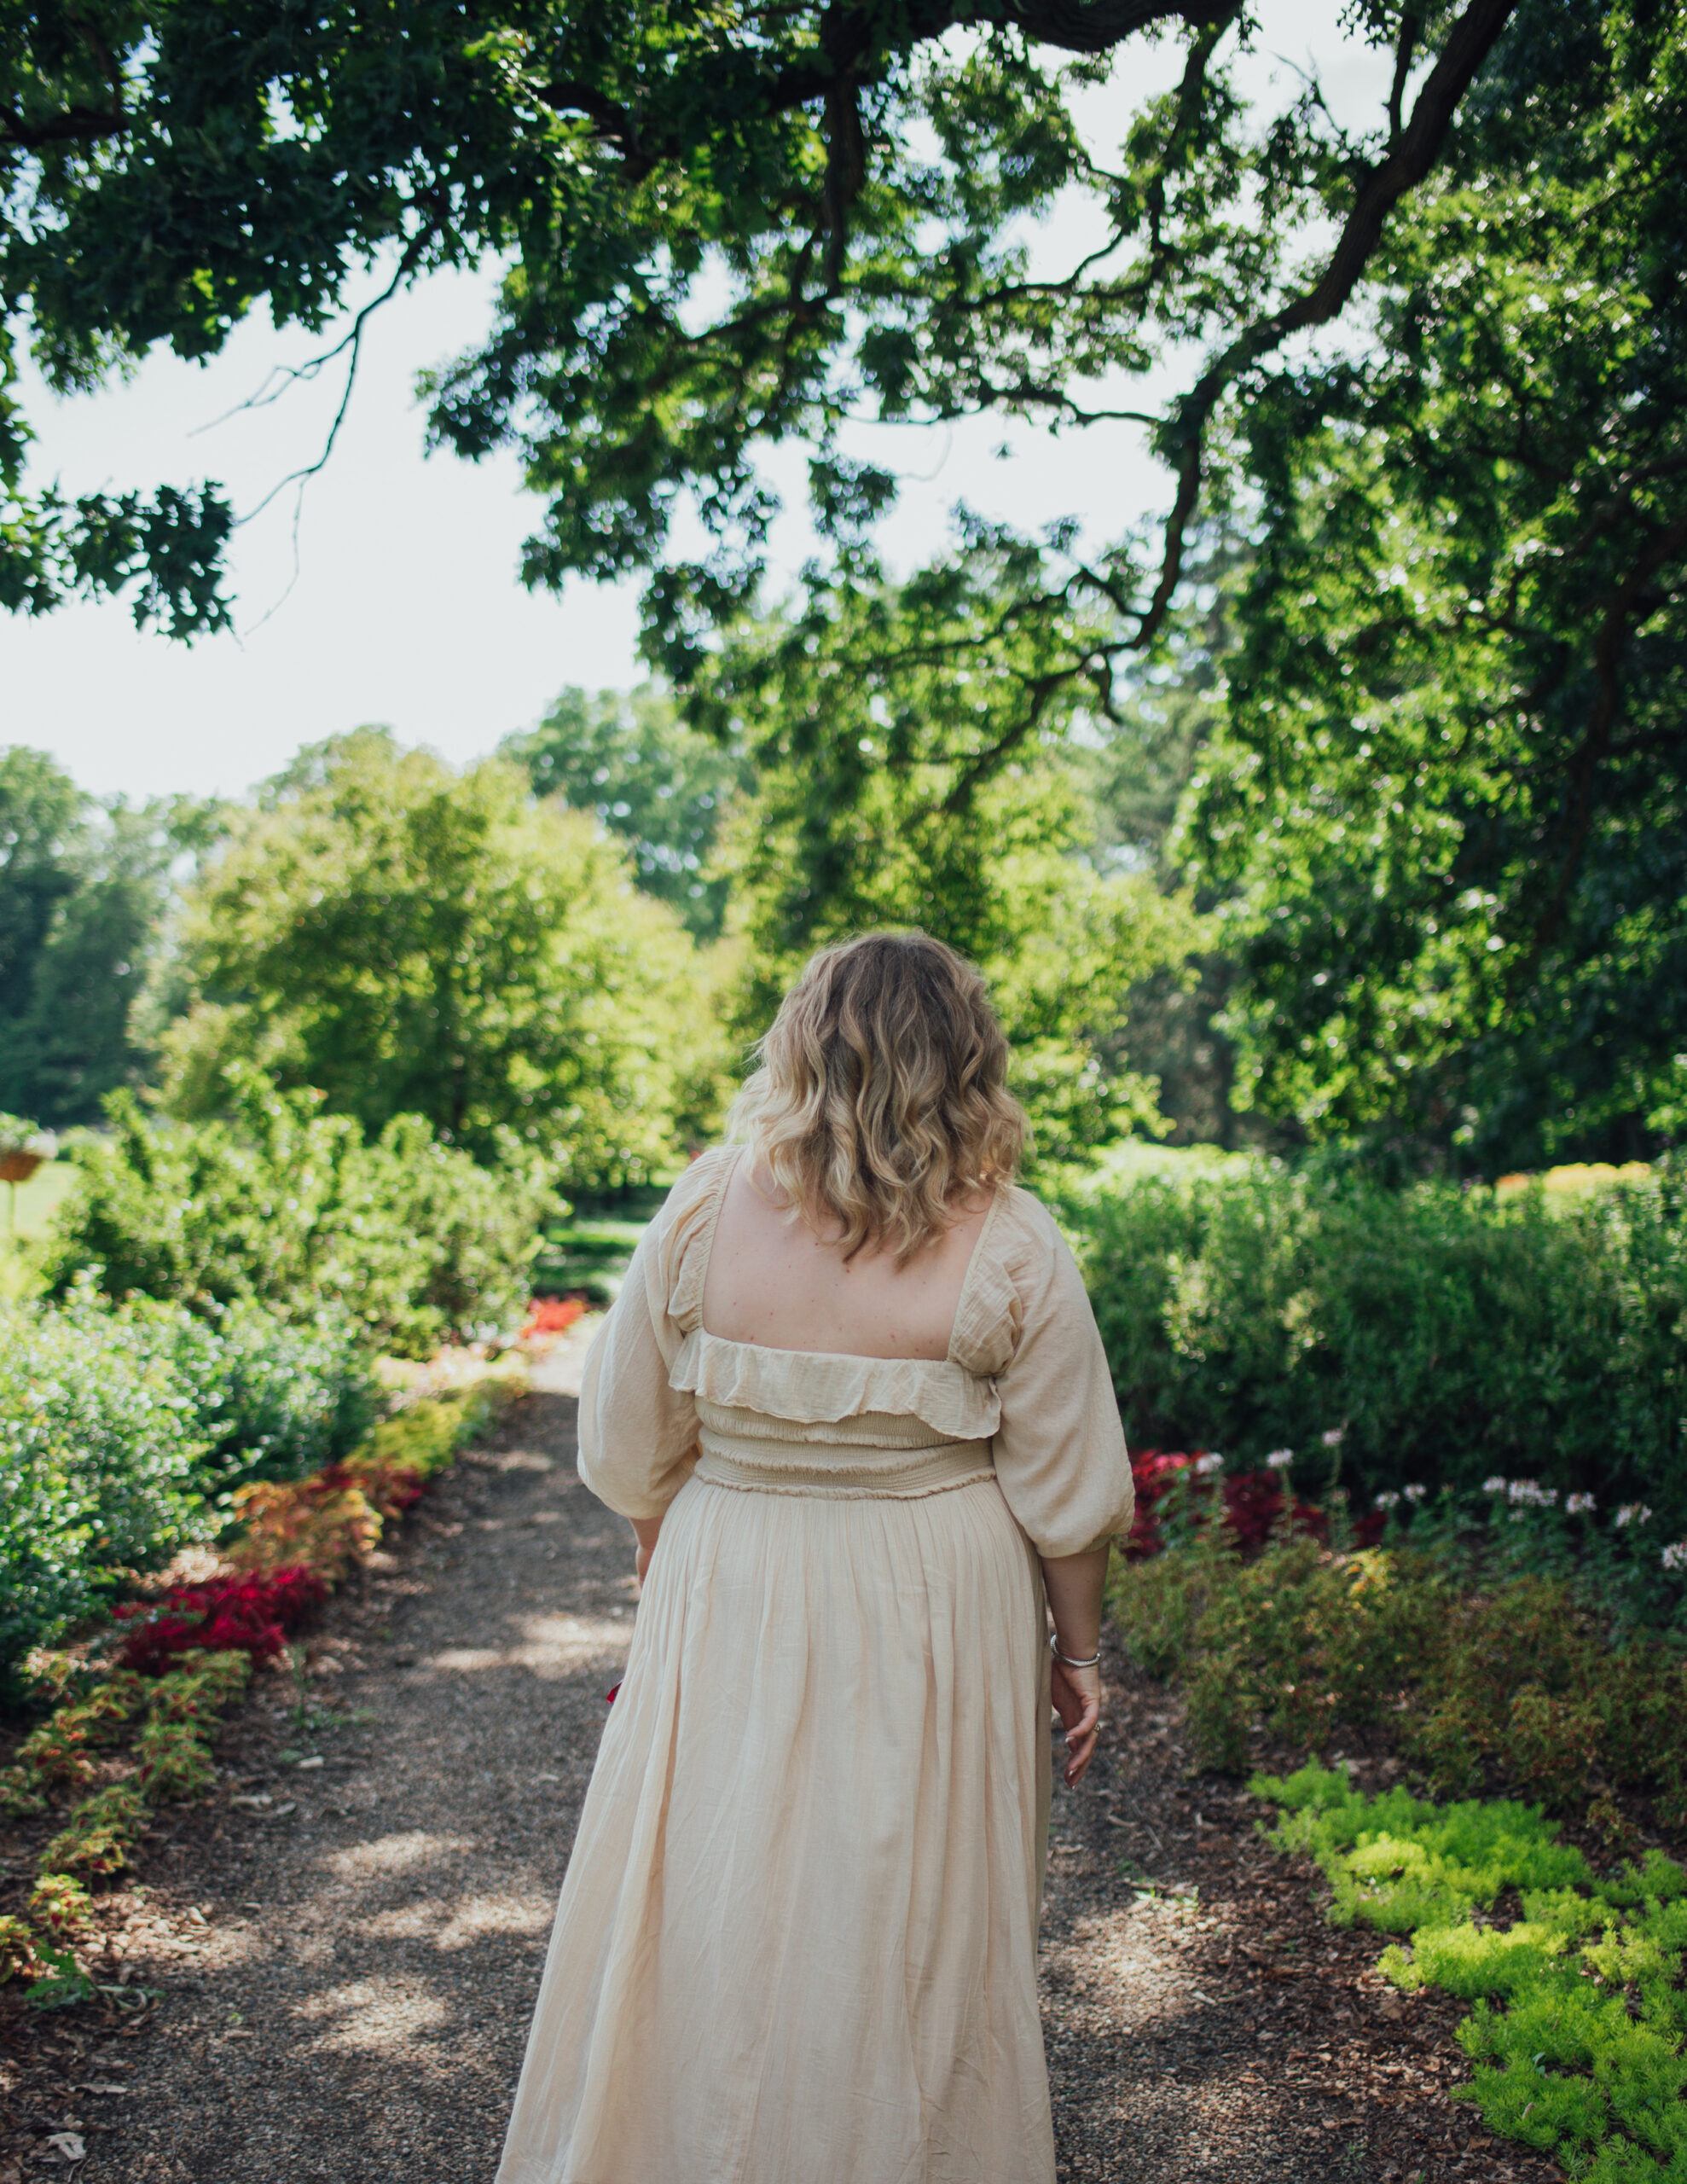 Sharing a review of the Free People Oasis Midi Dress. Details about fit, length and current colors that are currently in stock. 